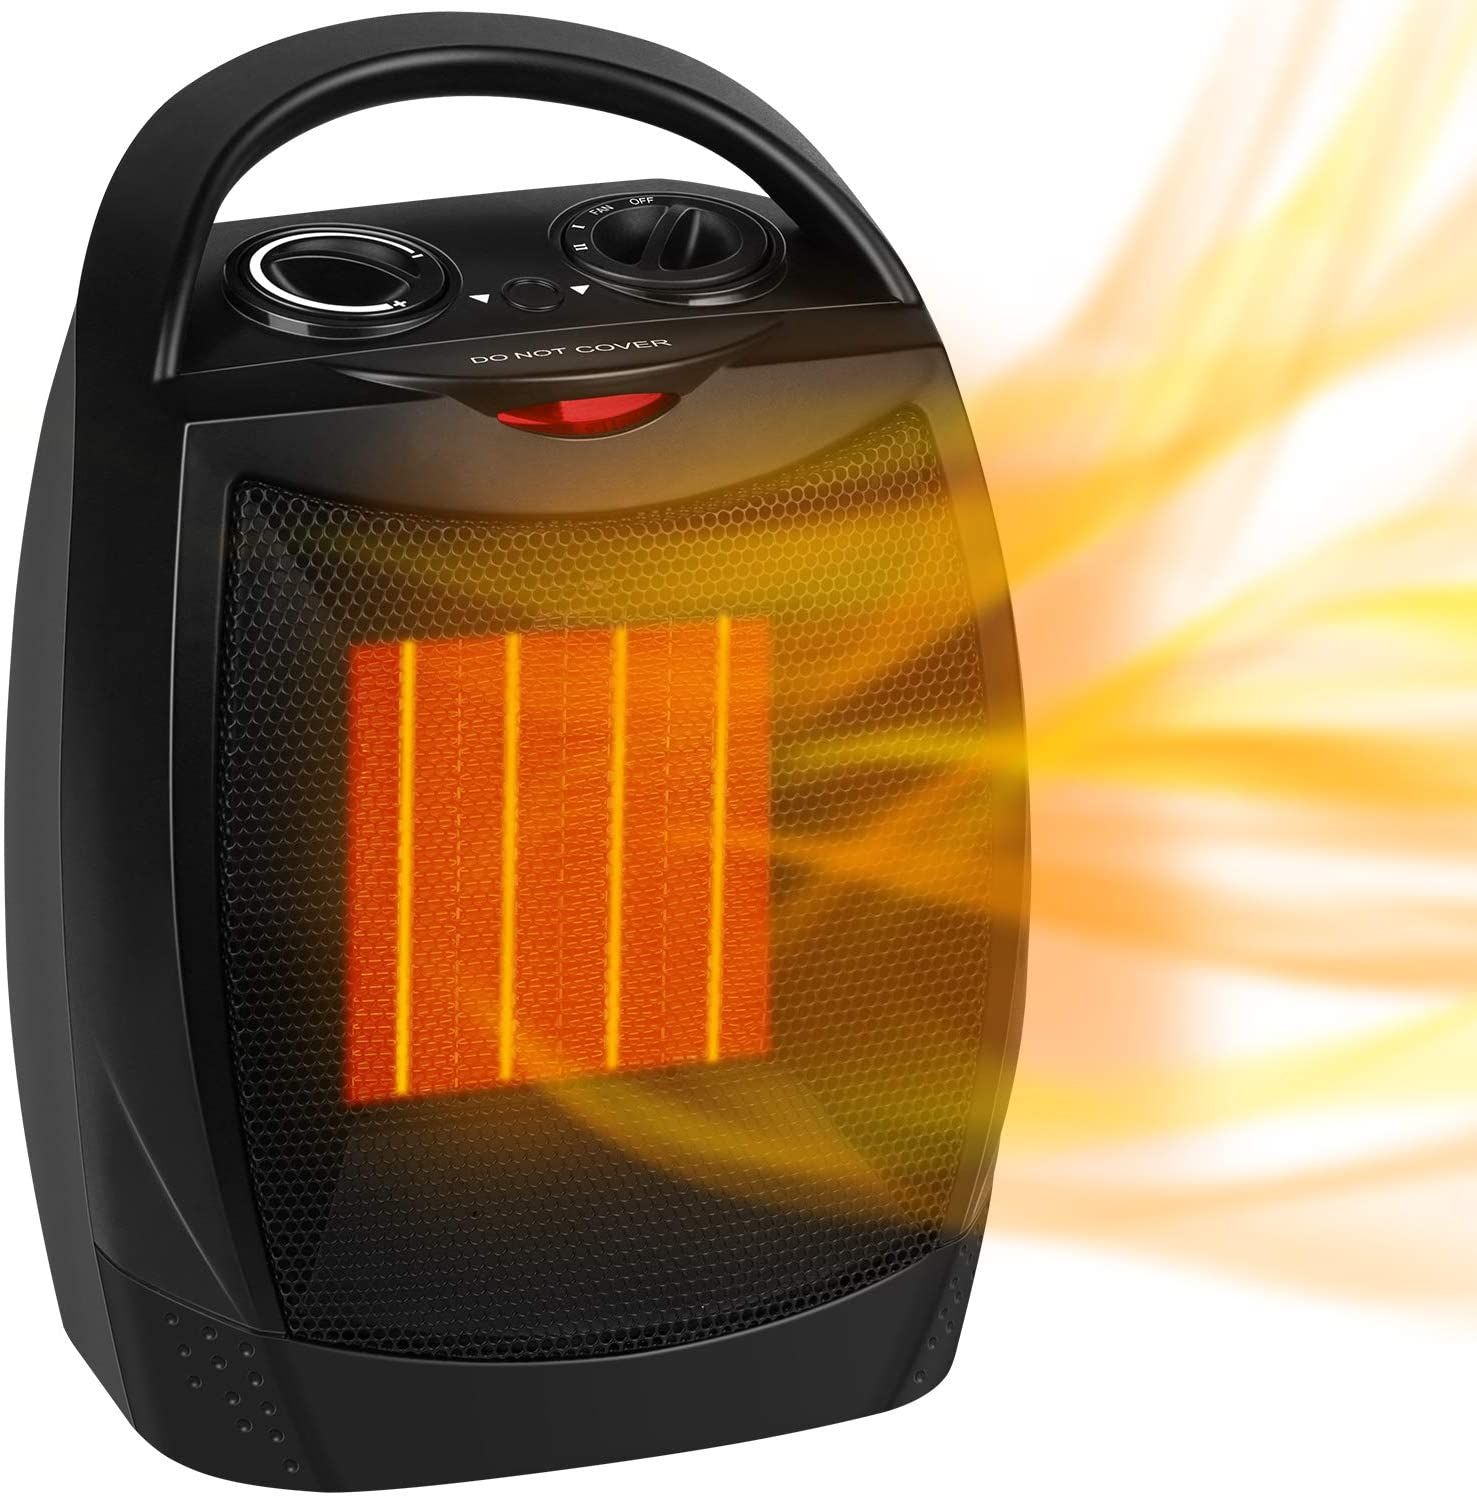 GiveBest Portable Electric Space Heater Design 1